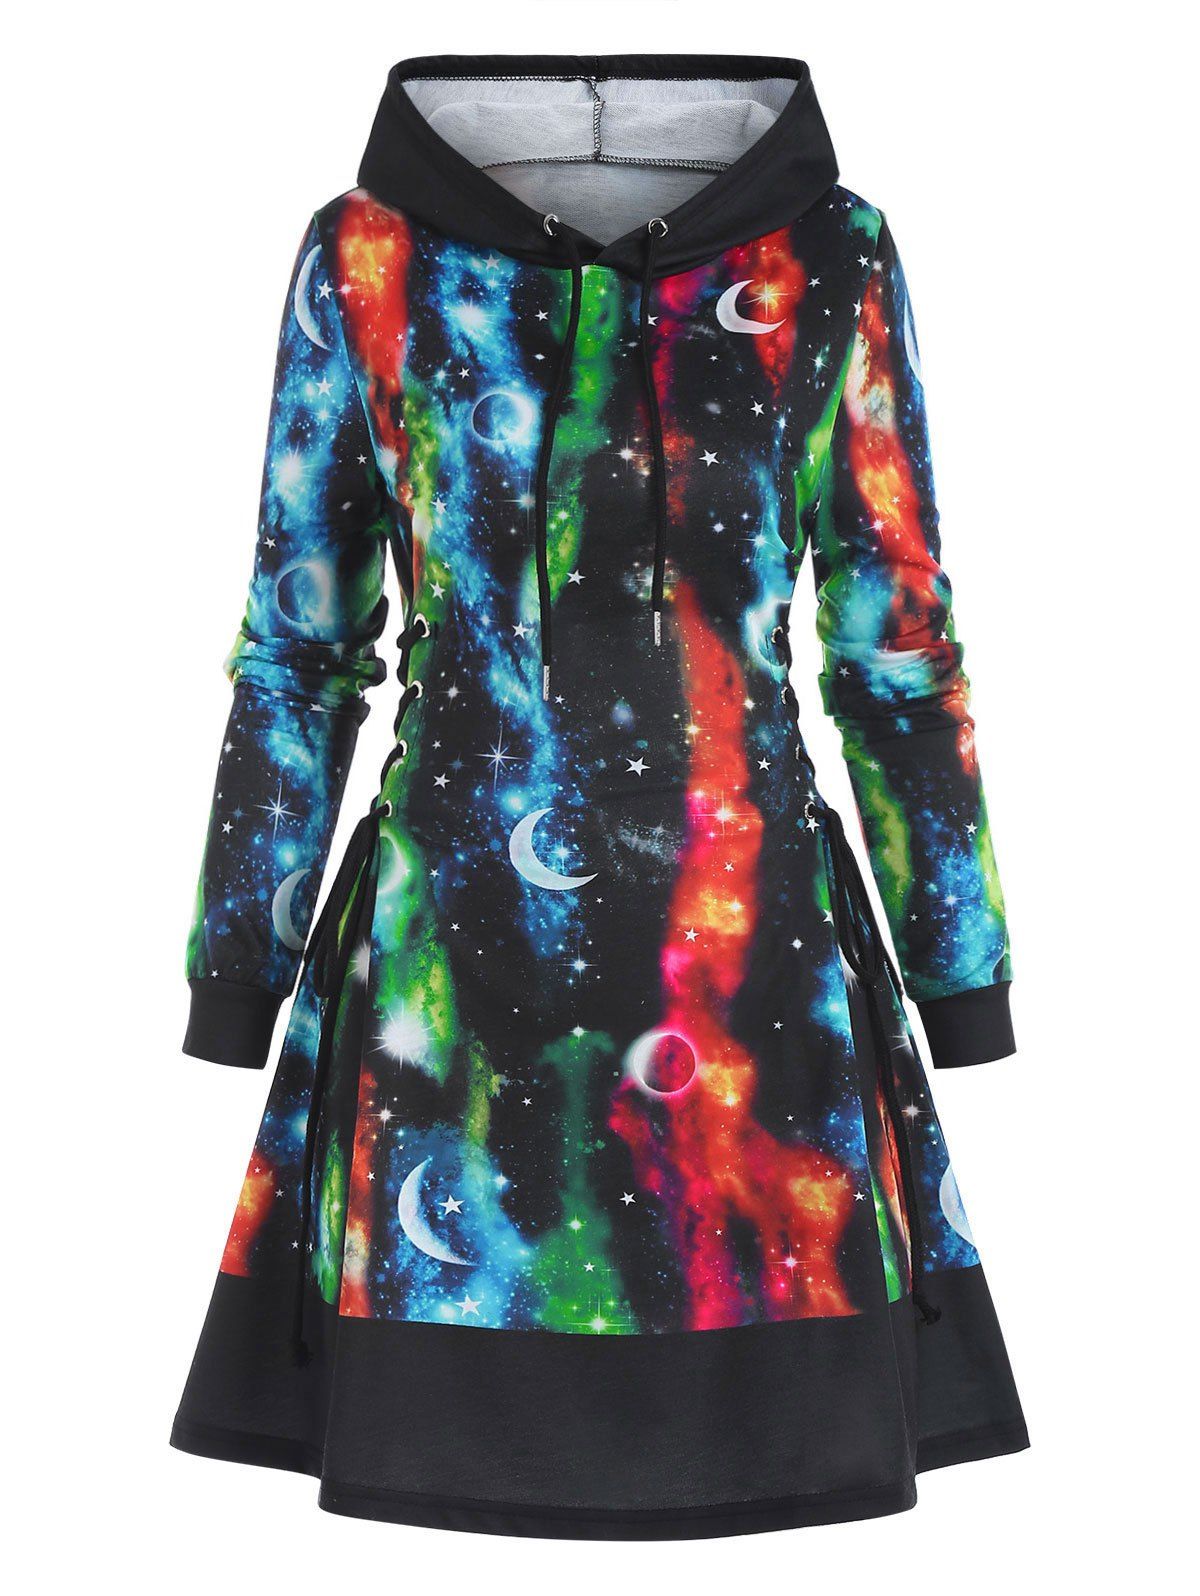 Galaxy Starry Print Hooded Lace Up Dress - multicolor L